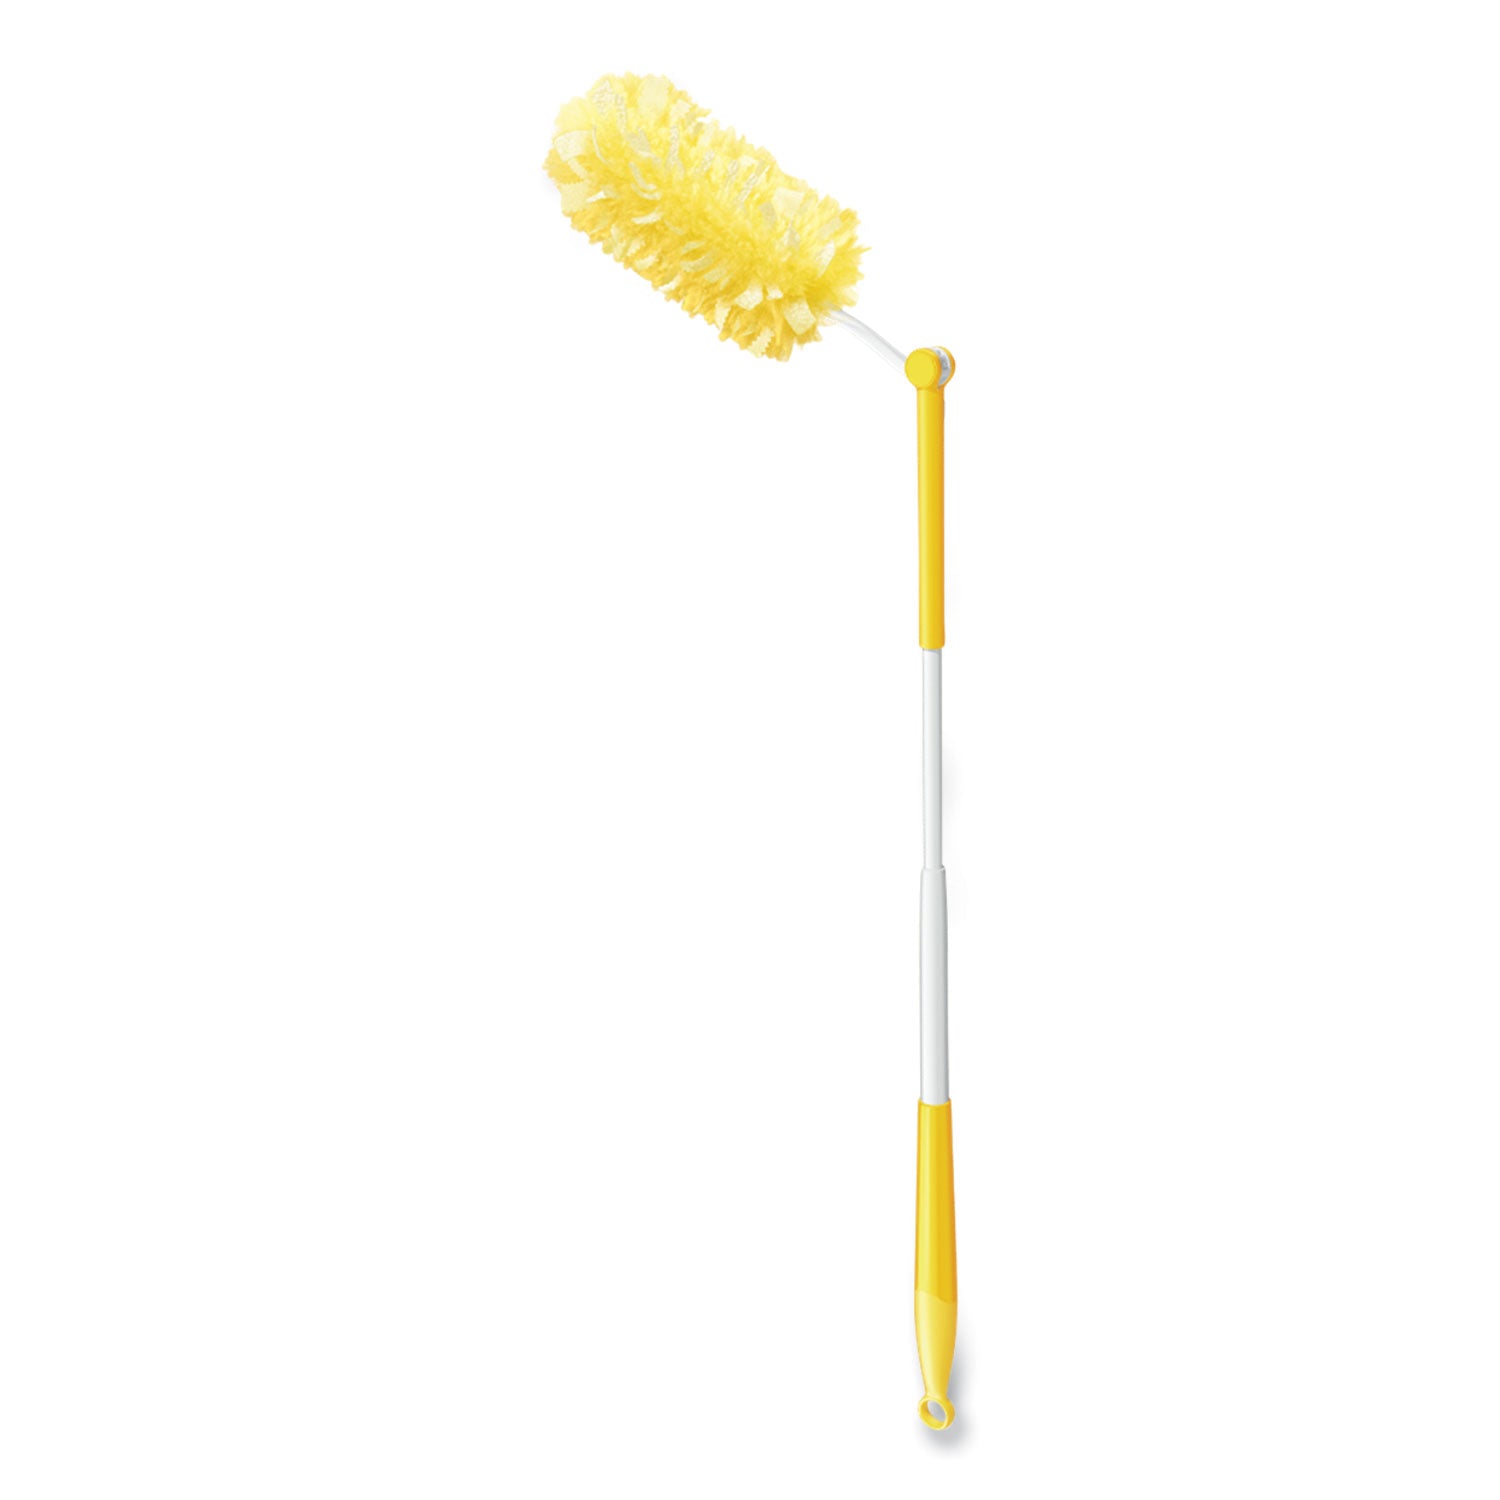 Heavy Duty Dusters with Extendable Handle, 14" to 3 ft Handle, 1 Handle and 3 Dusters/Kit - 